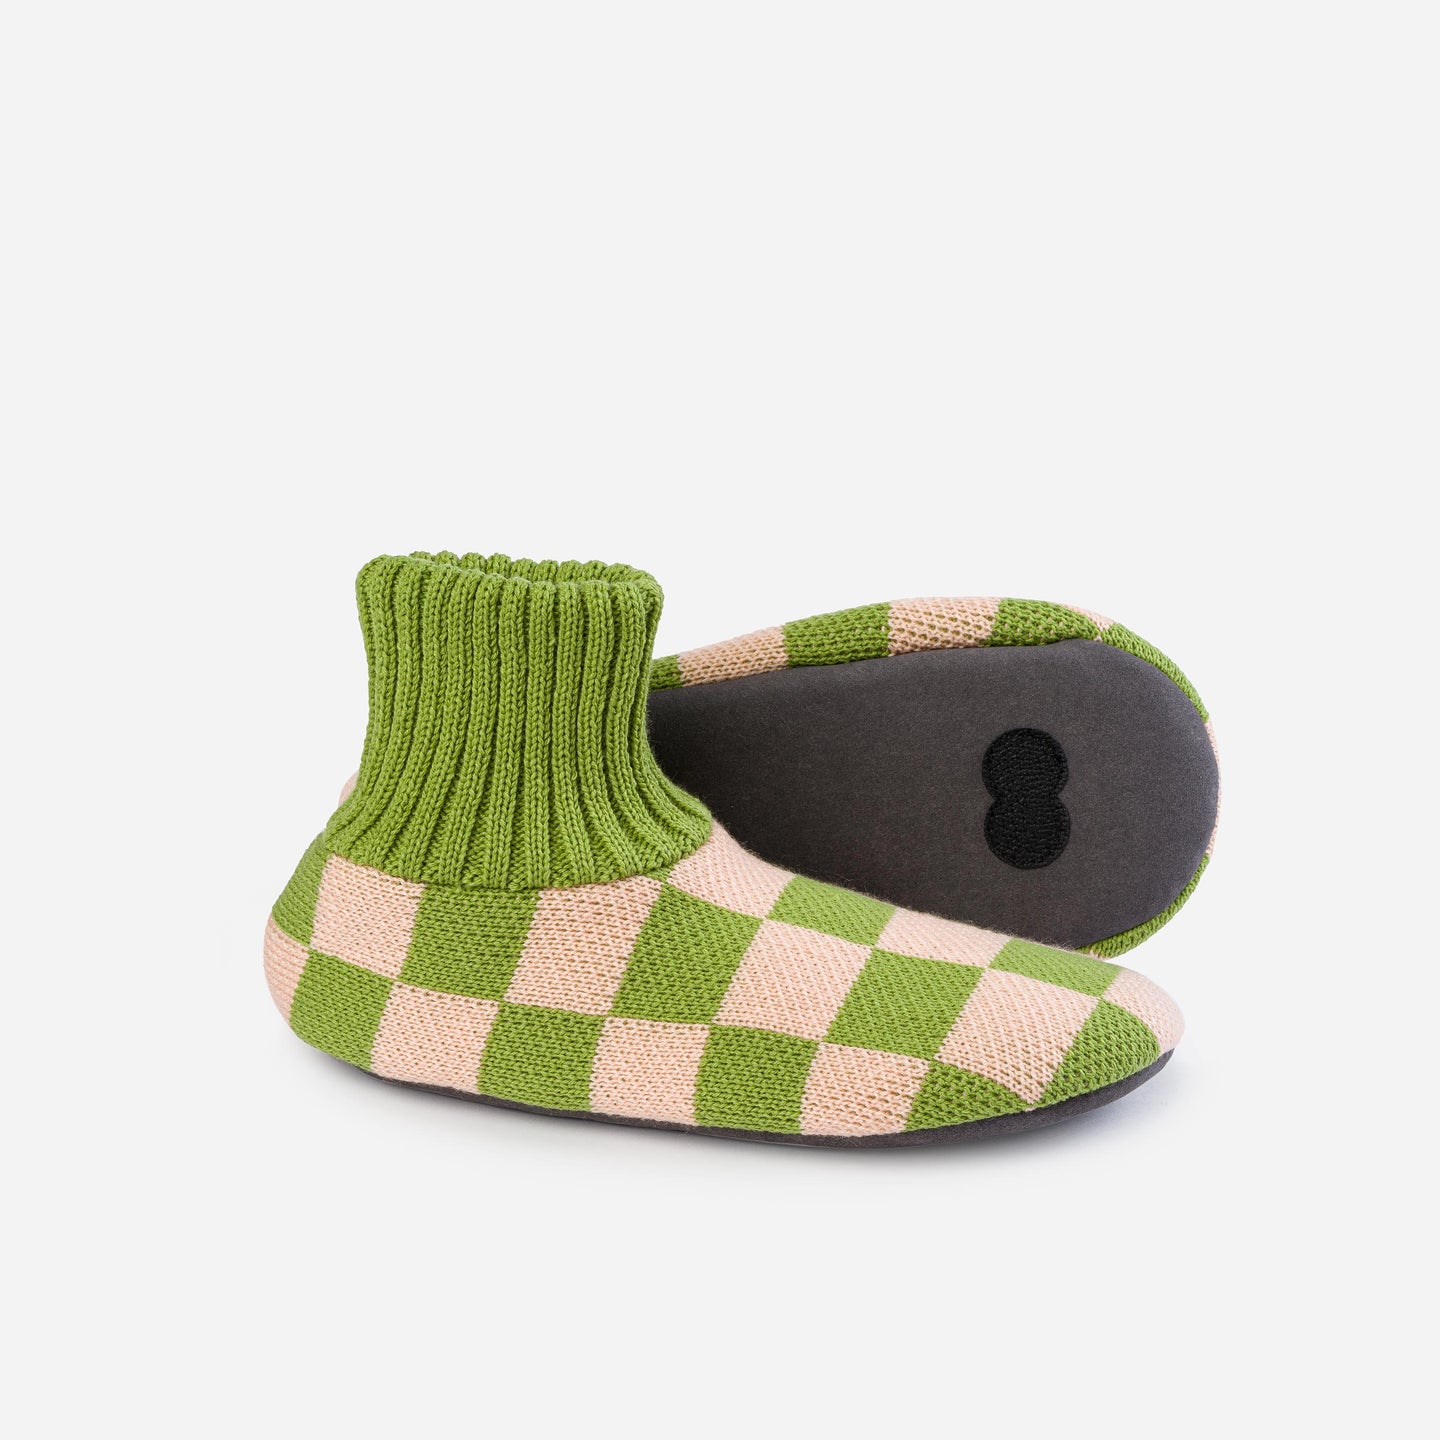 Checkerboard Knitted Sock Slippers Knit